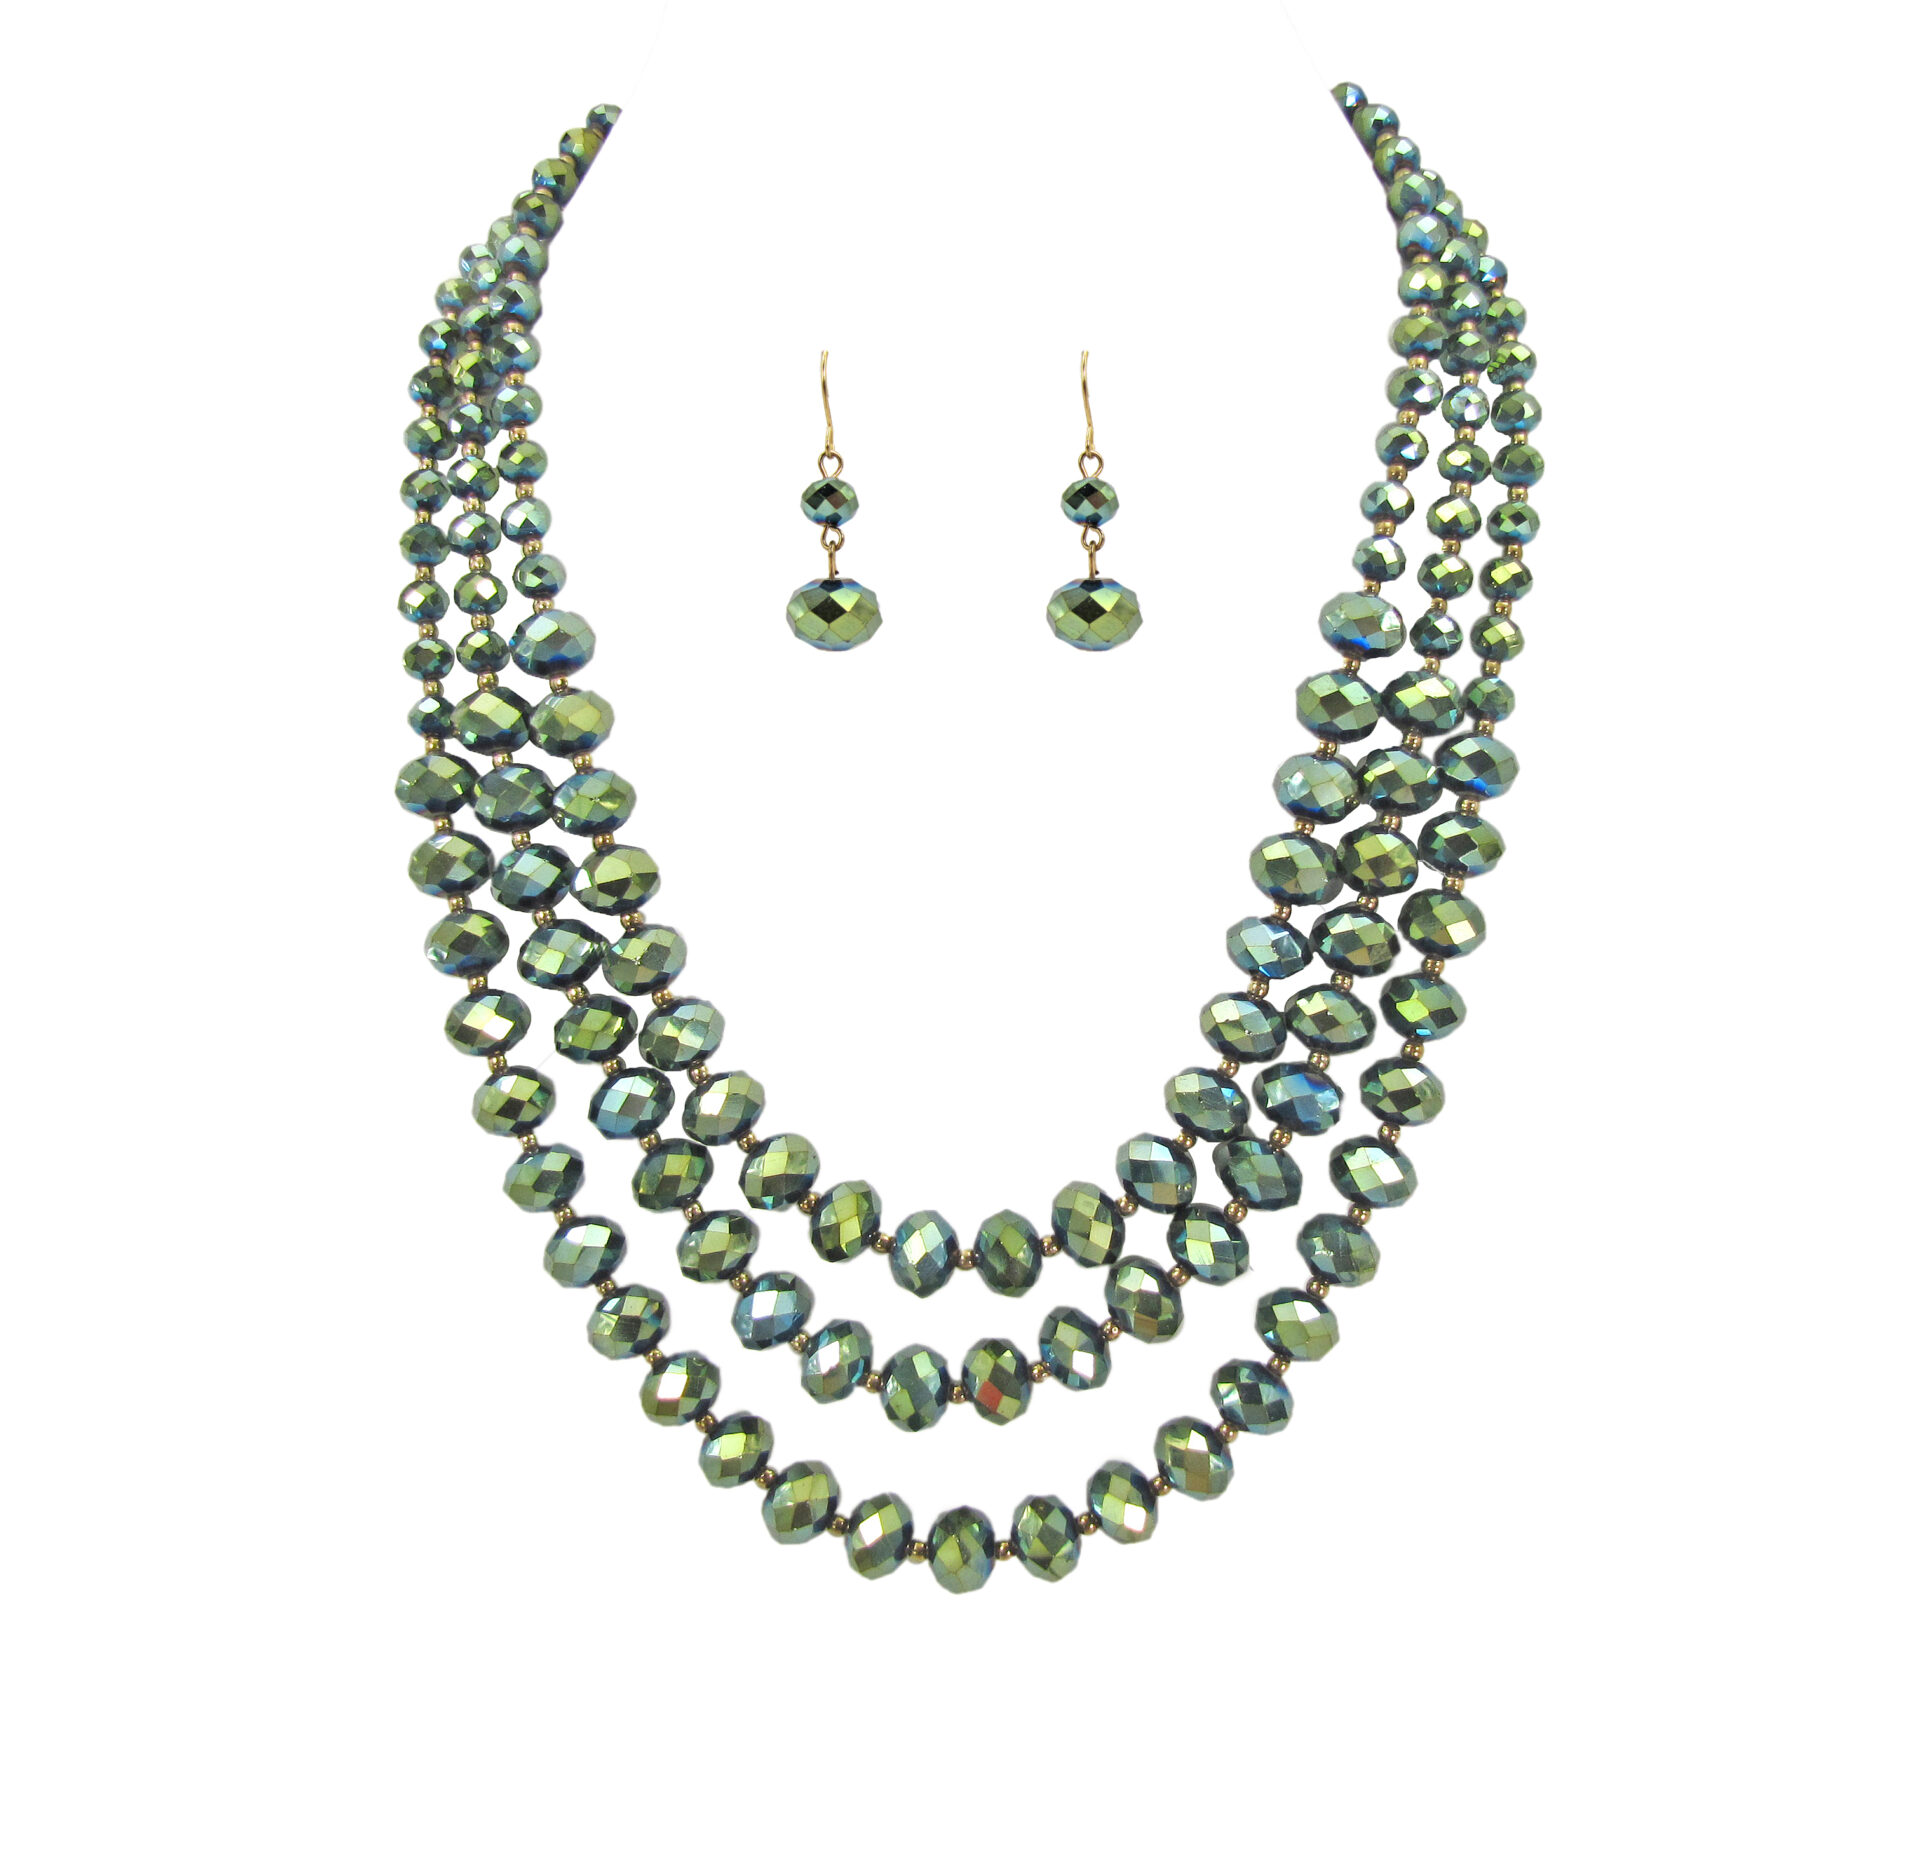 Green glass layered necklace and earrings set